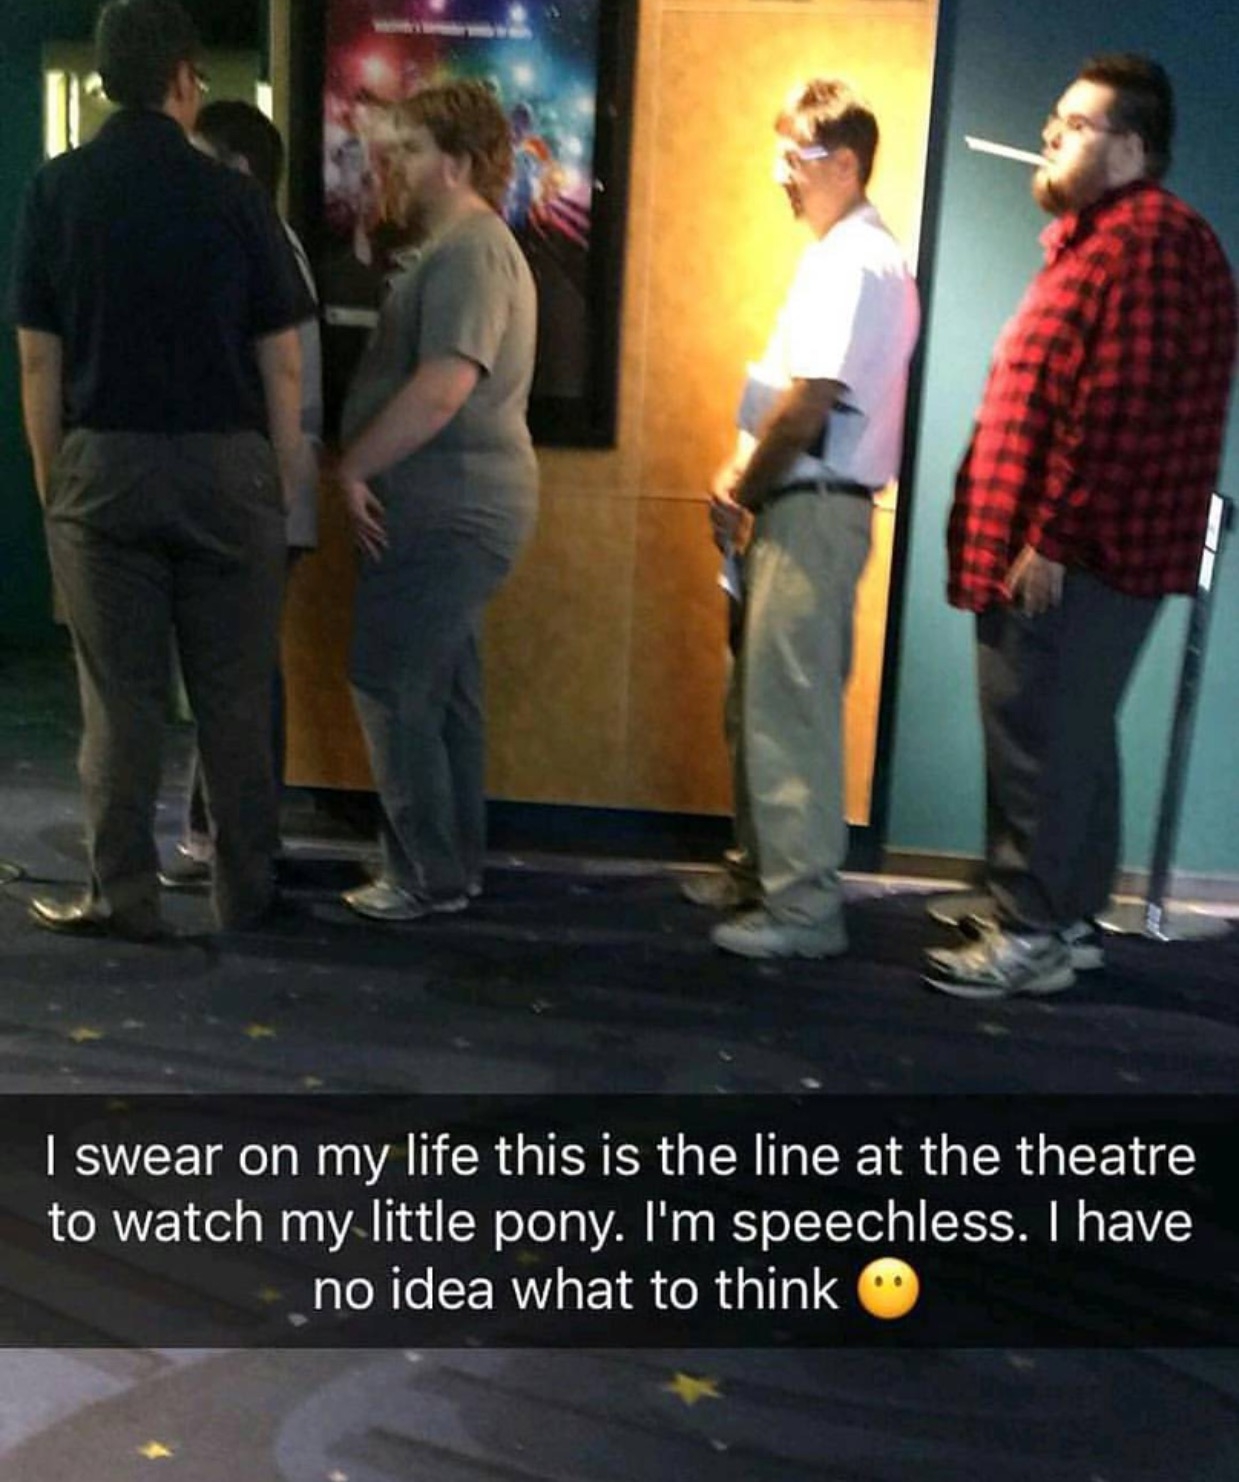 thestra mlp - I swear on my life this is the line at the theatre to watch my little pony. I'm speechless. I have no idea what to think